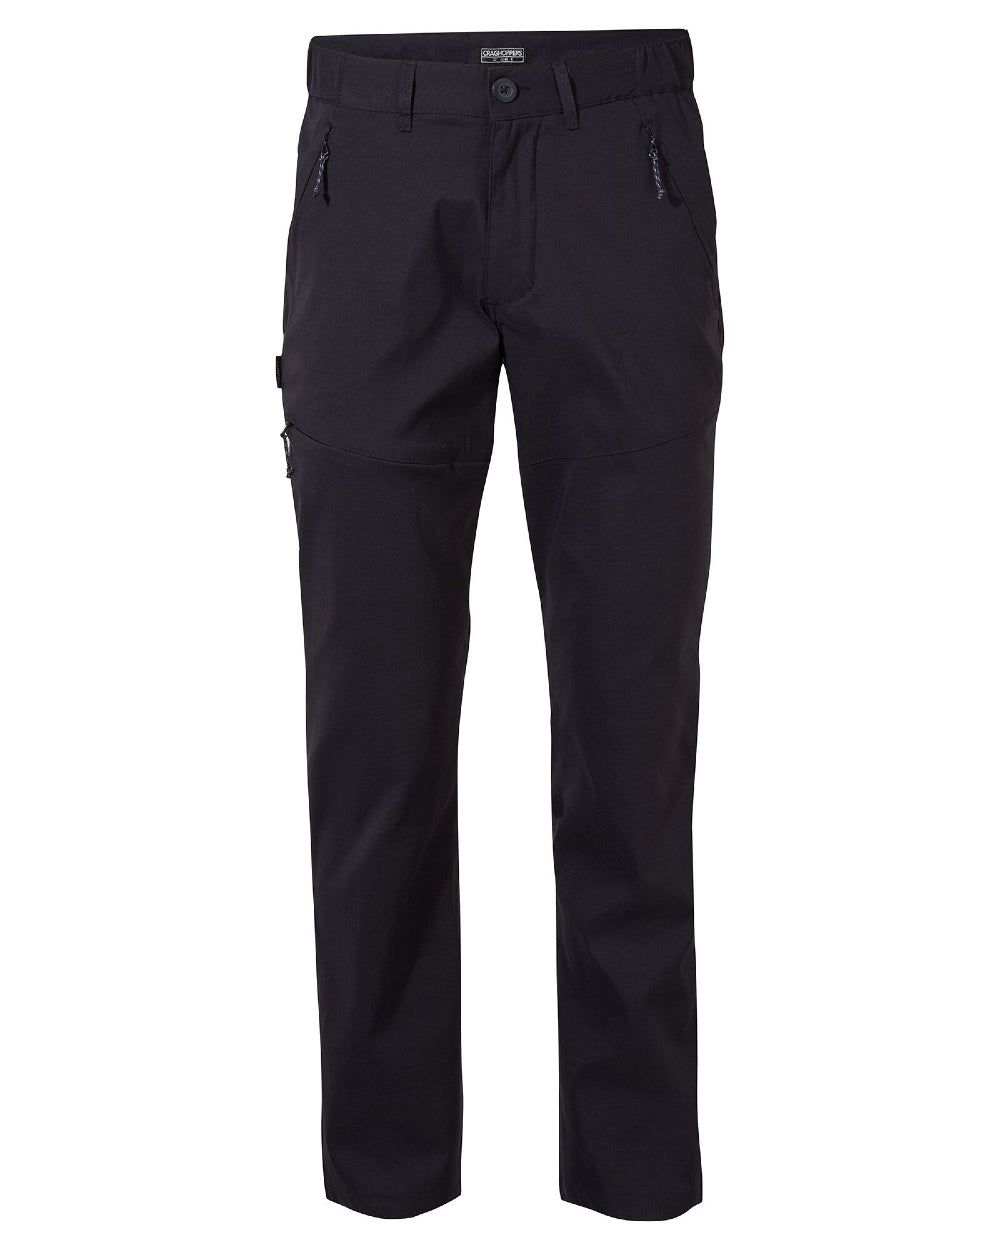 Dark Navy Coloured Craghoppers Mens Kiwi Pro II Trousers On A White Background 